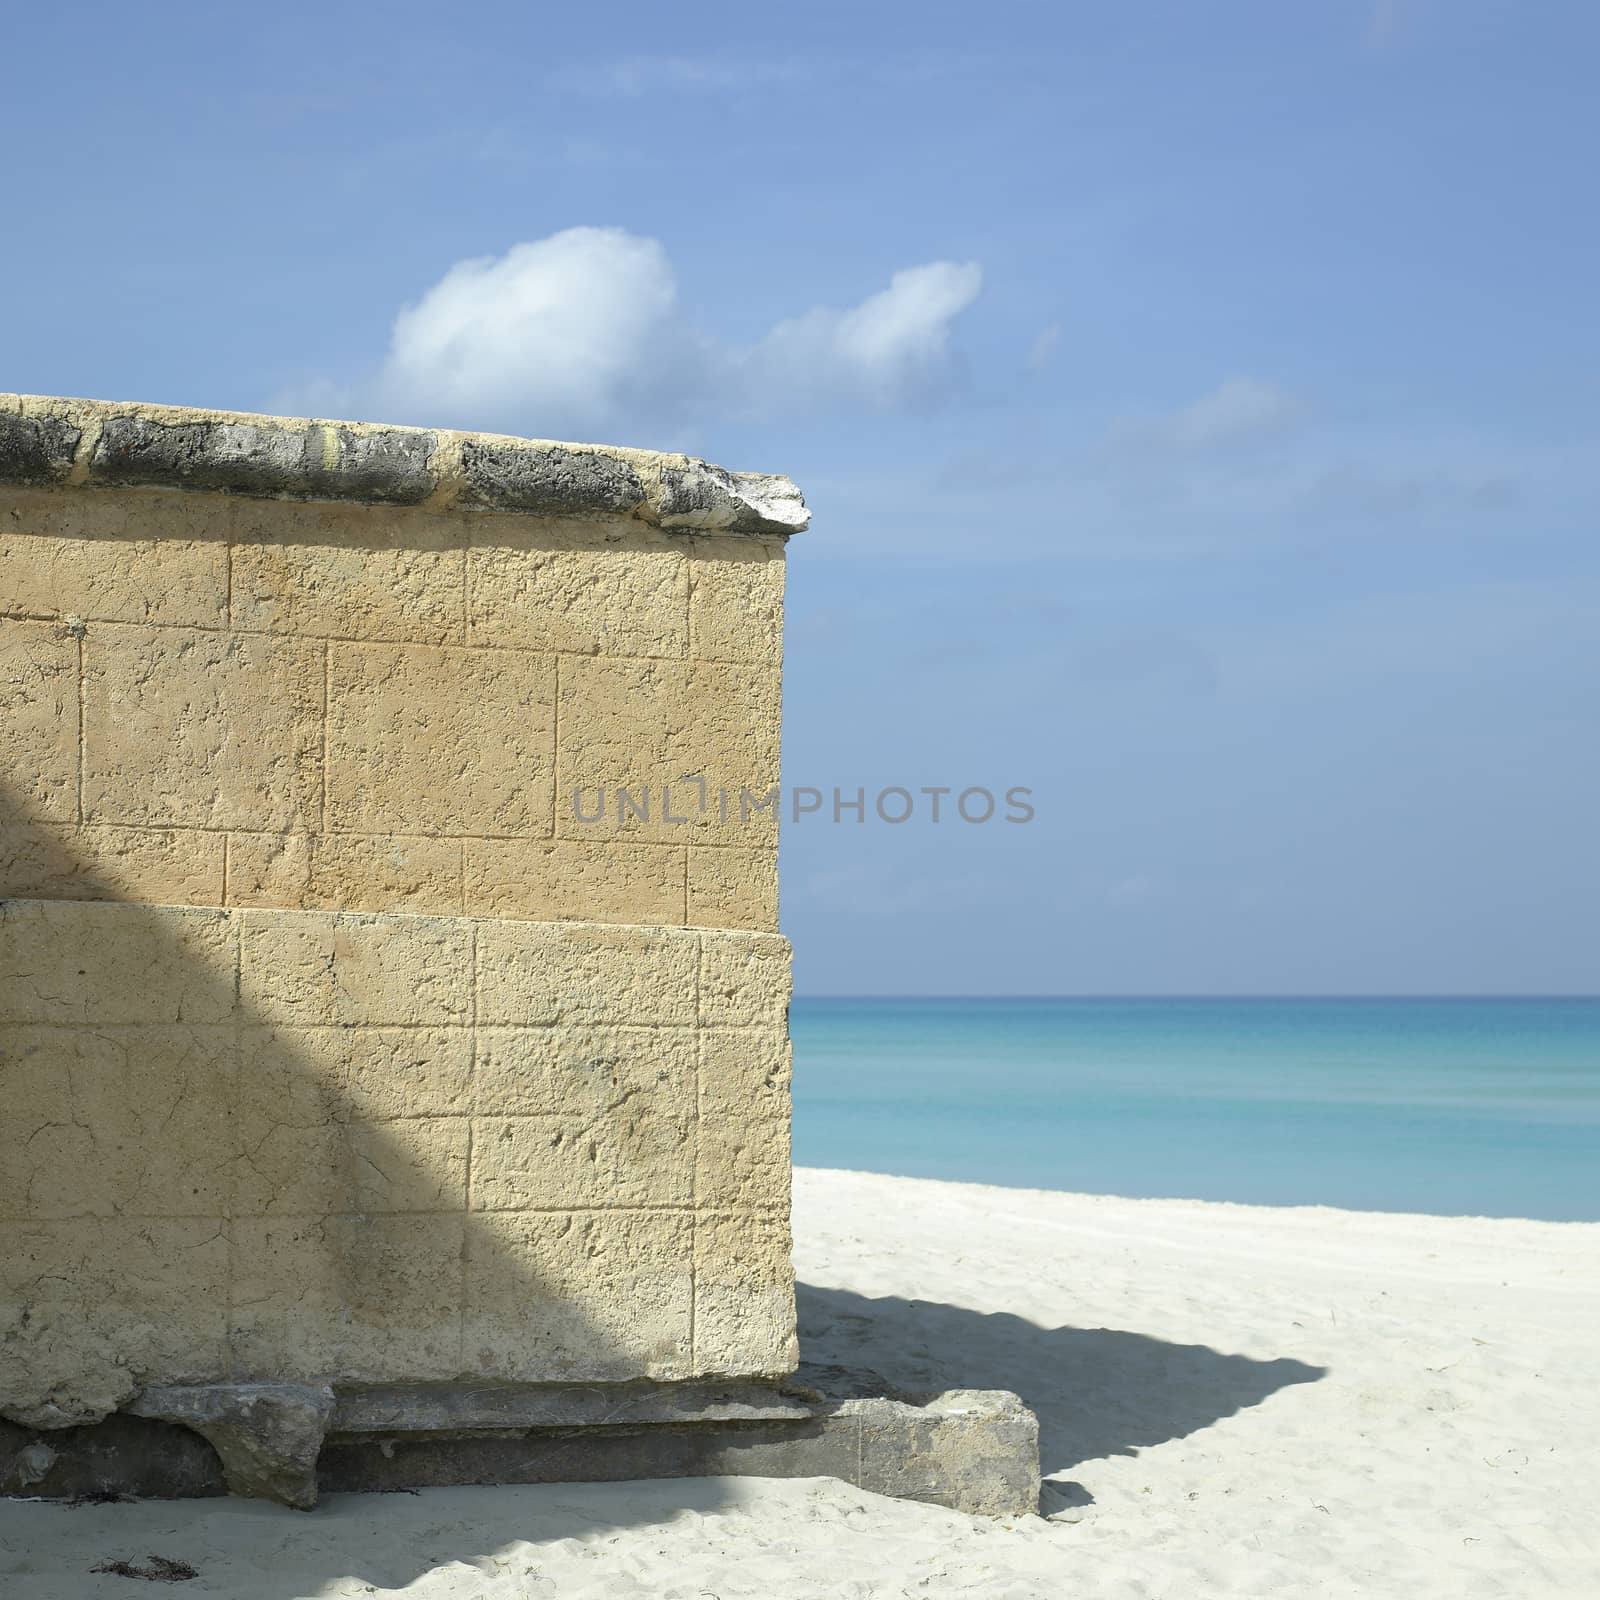 Edge of a stone walled structure on a beach